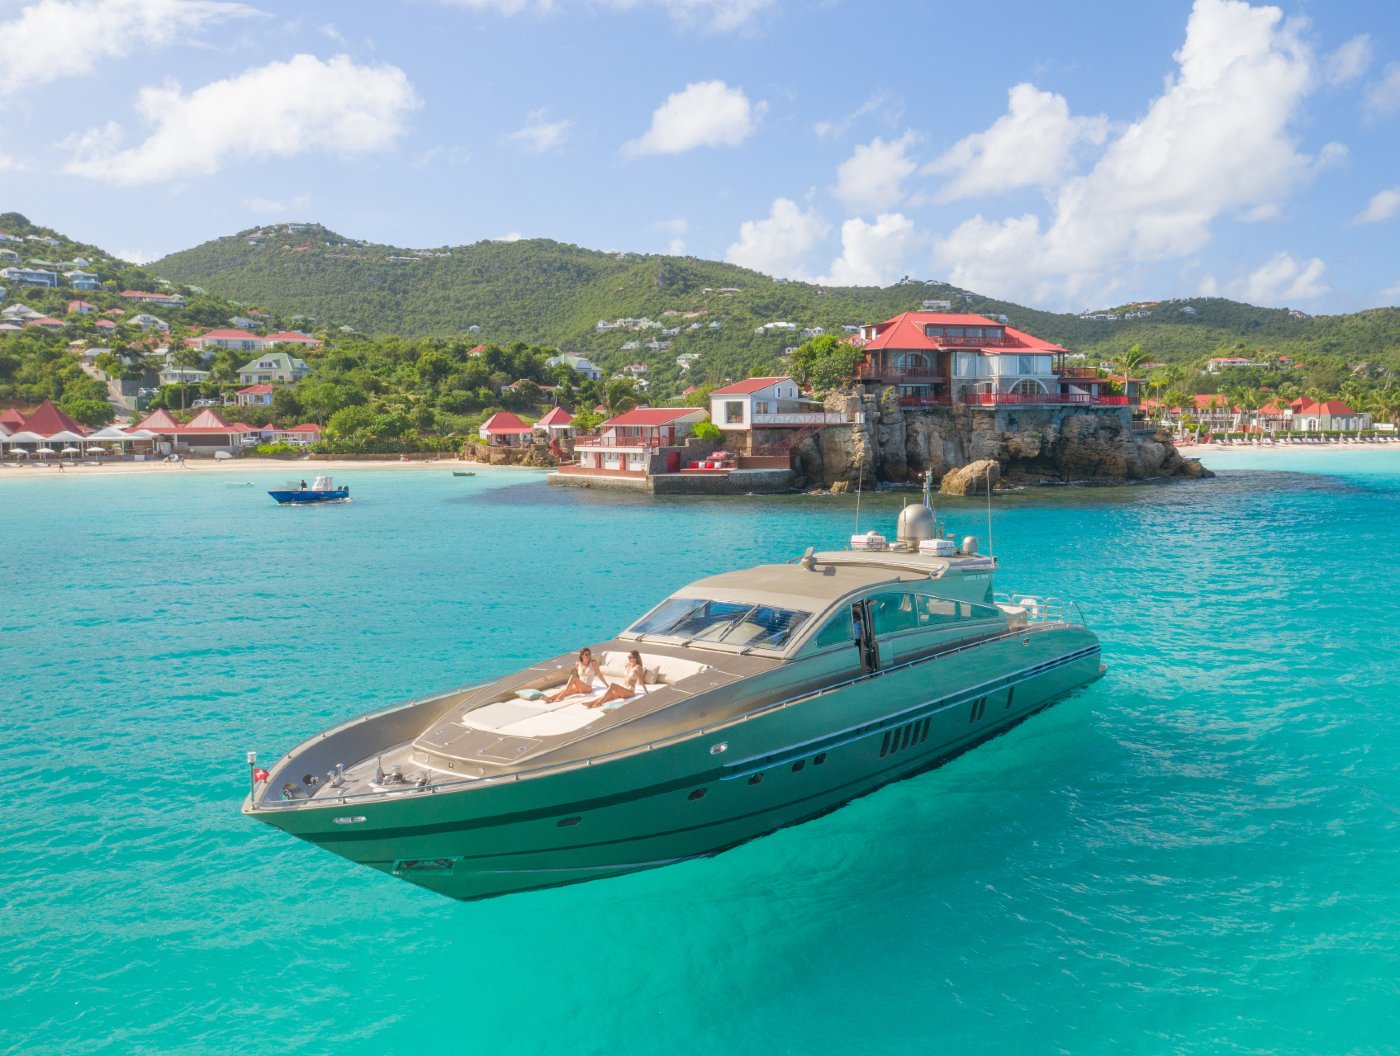 8 Best Things To Do in Saint Barthelemy (StBarth) Caribbean